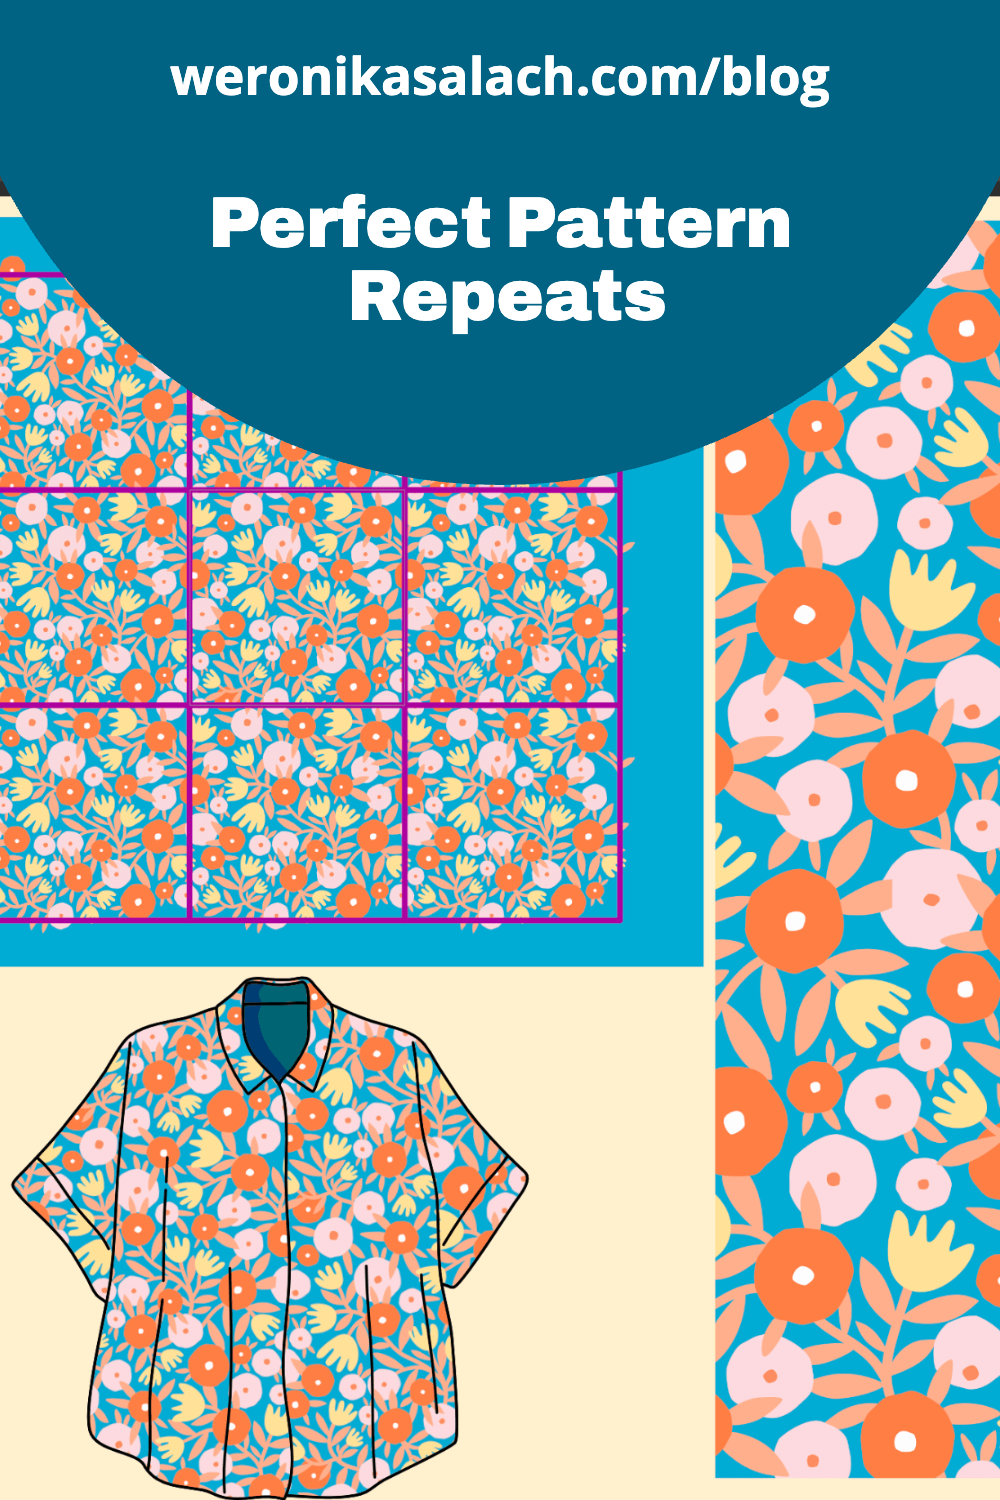 affinity designer perfect vector repeat_1.png